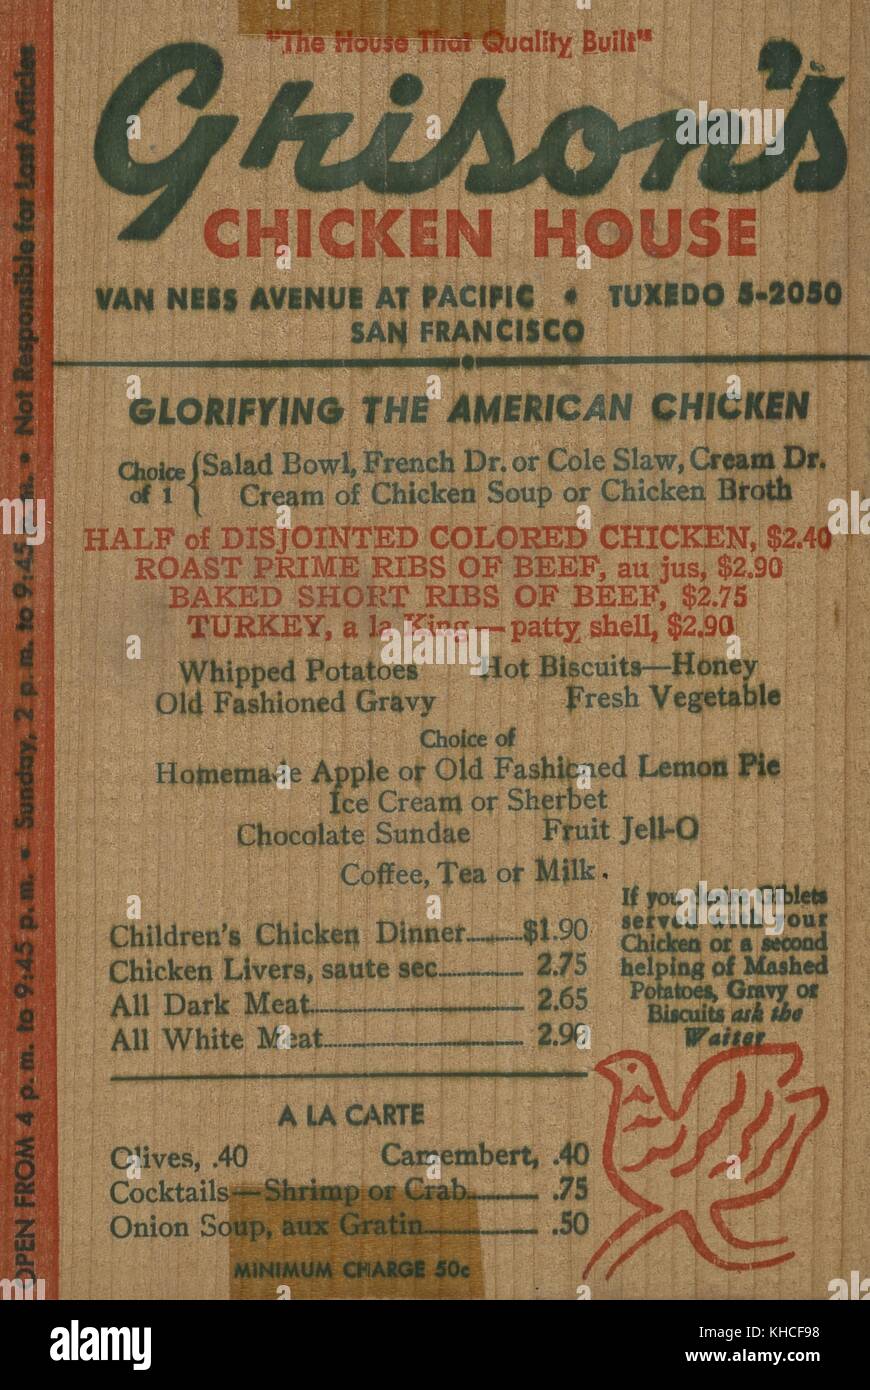 A menu from Grison's Chicken House, which was a restaurant founded in 1938 by Bob Grison, who was a famous restaurateur who was frequently written about in national magazines and saw his concepts imitated, San Francisco, California, 1900. From the New York Public Library. Stock Photo